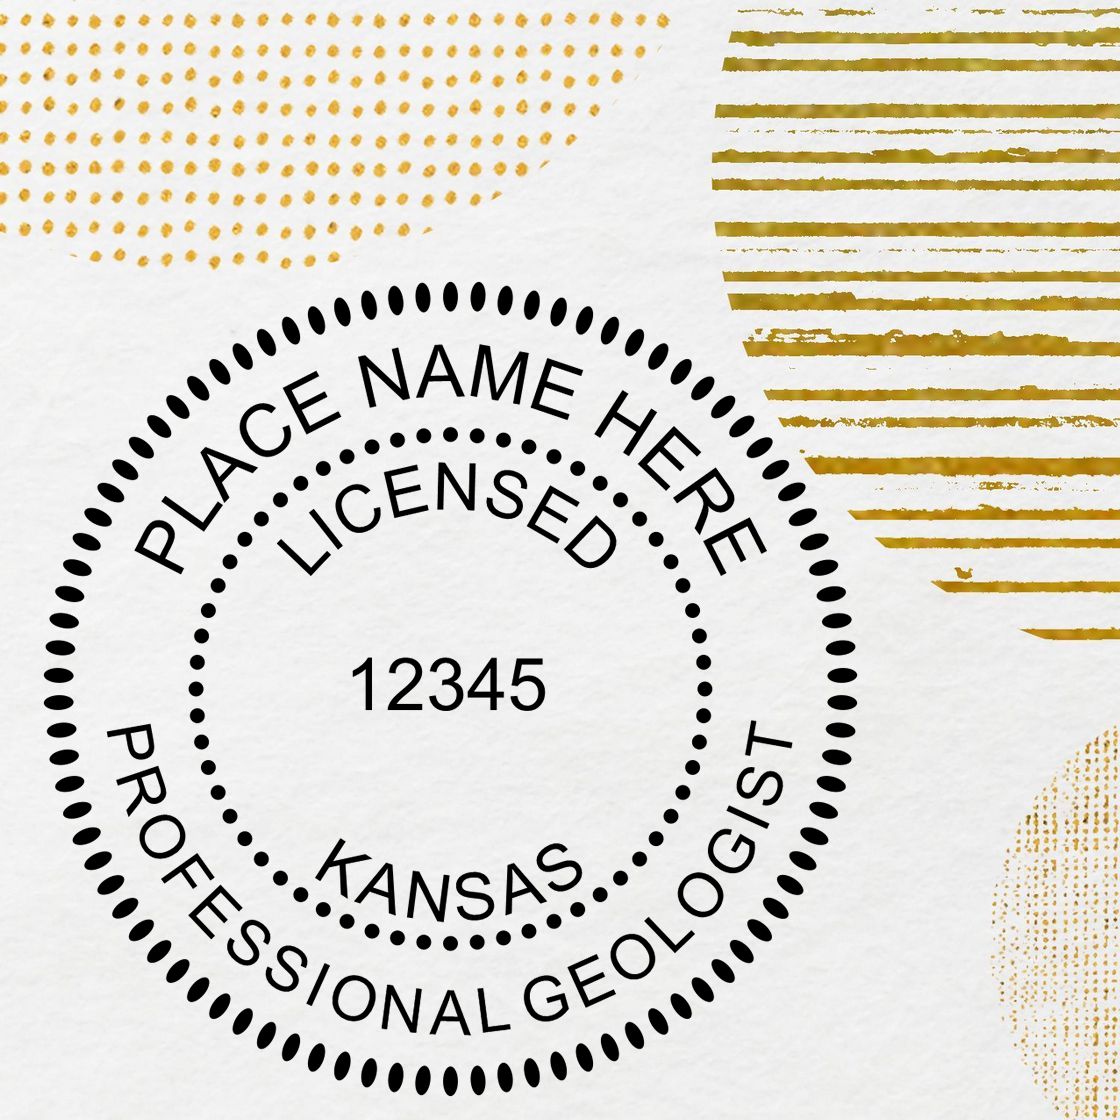 This paper is stamped with a sample imprint of the Premium MaxLight Pre-Inked Kansas Geology Stamp, signifying its quality and reliability.